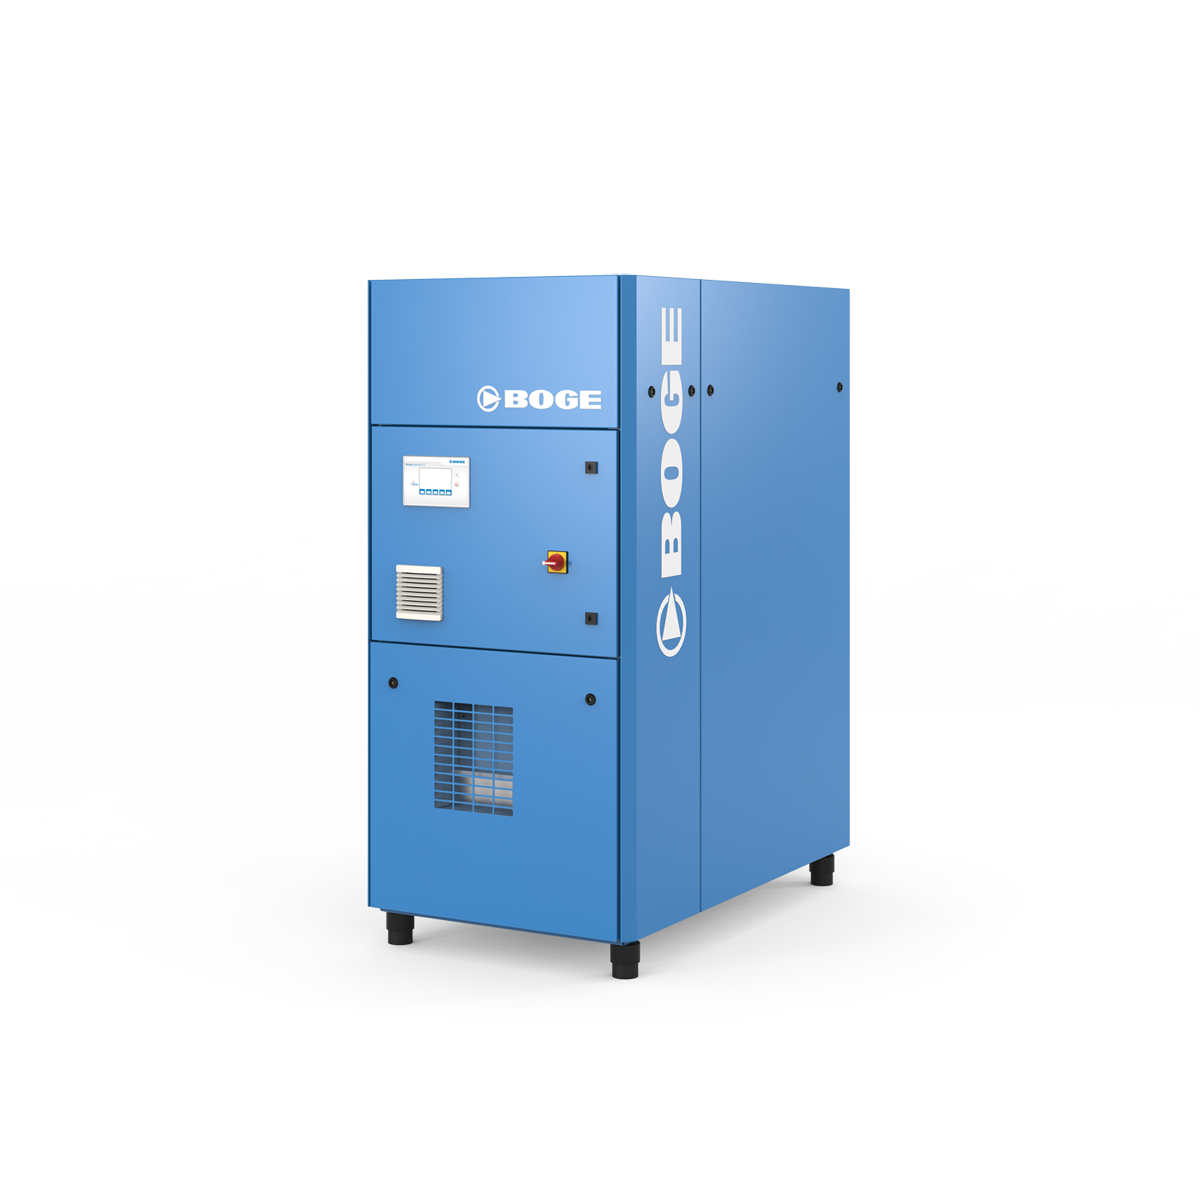 Scroll Compressors EO Series up to 22 kW